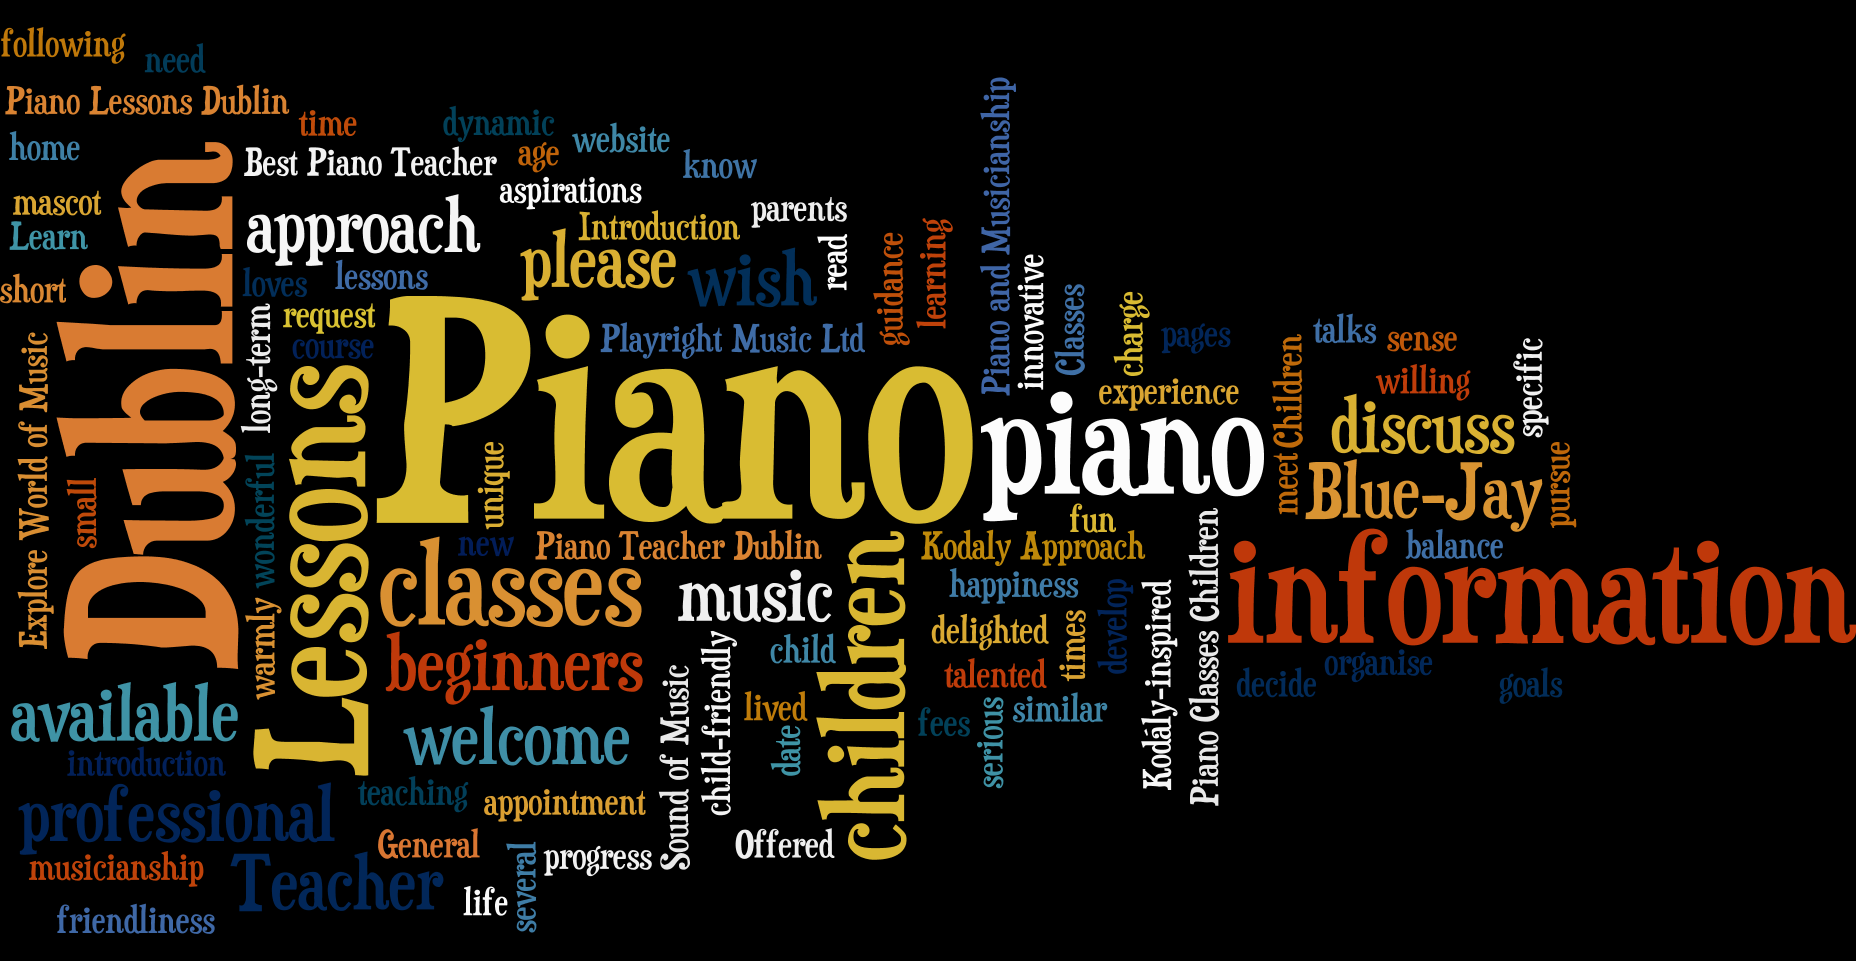 Piano and Musicianship Training from Playright Music Ltd., Dublin